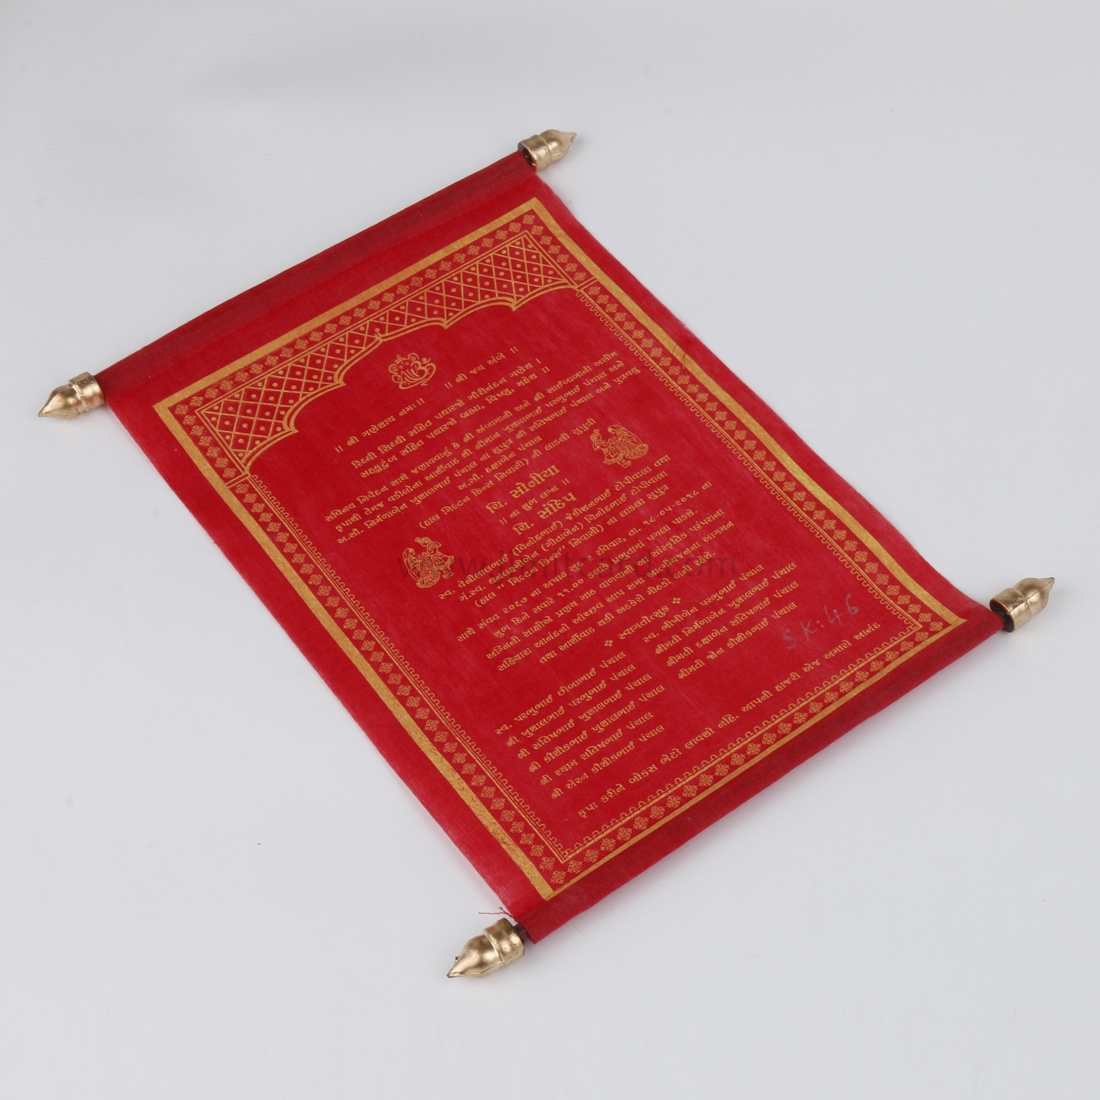 Personalized Wedding Scroll Invitation Card in Red Wooly Paper-9161